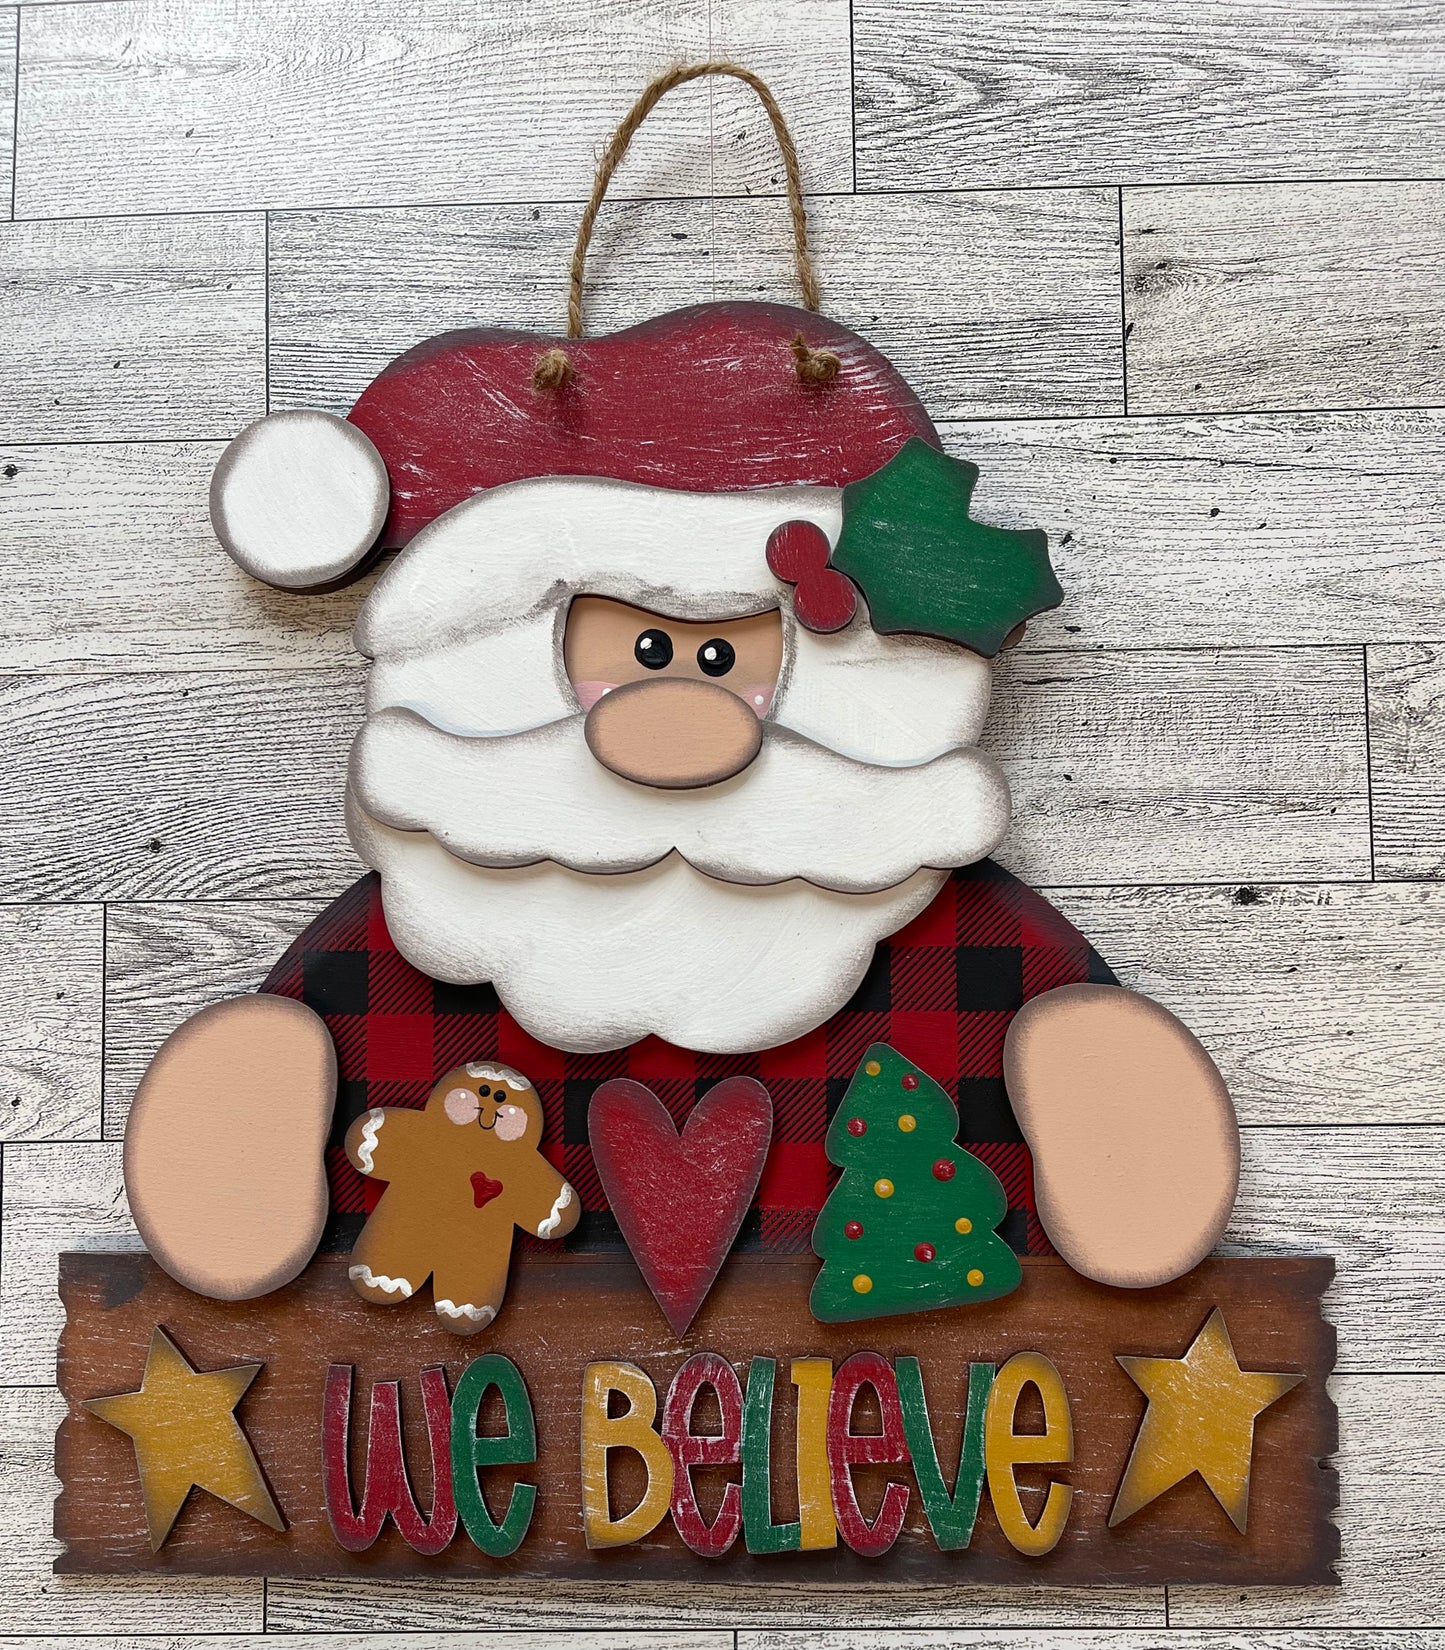 Santa - We Believe sign wood cutouts, unpainted ready for you to paint